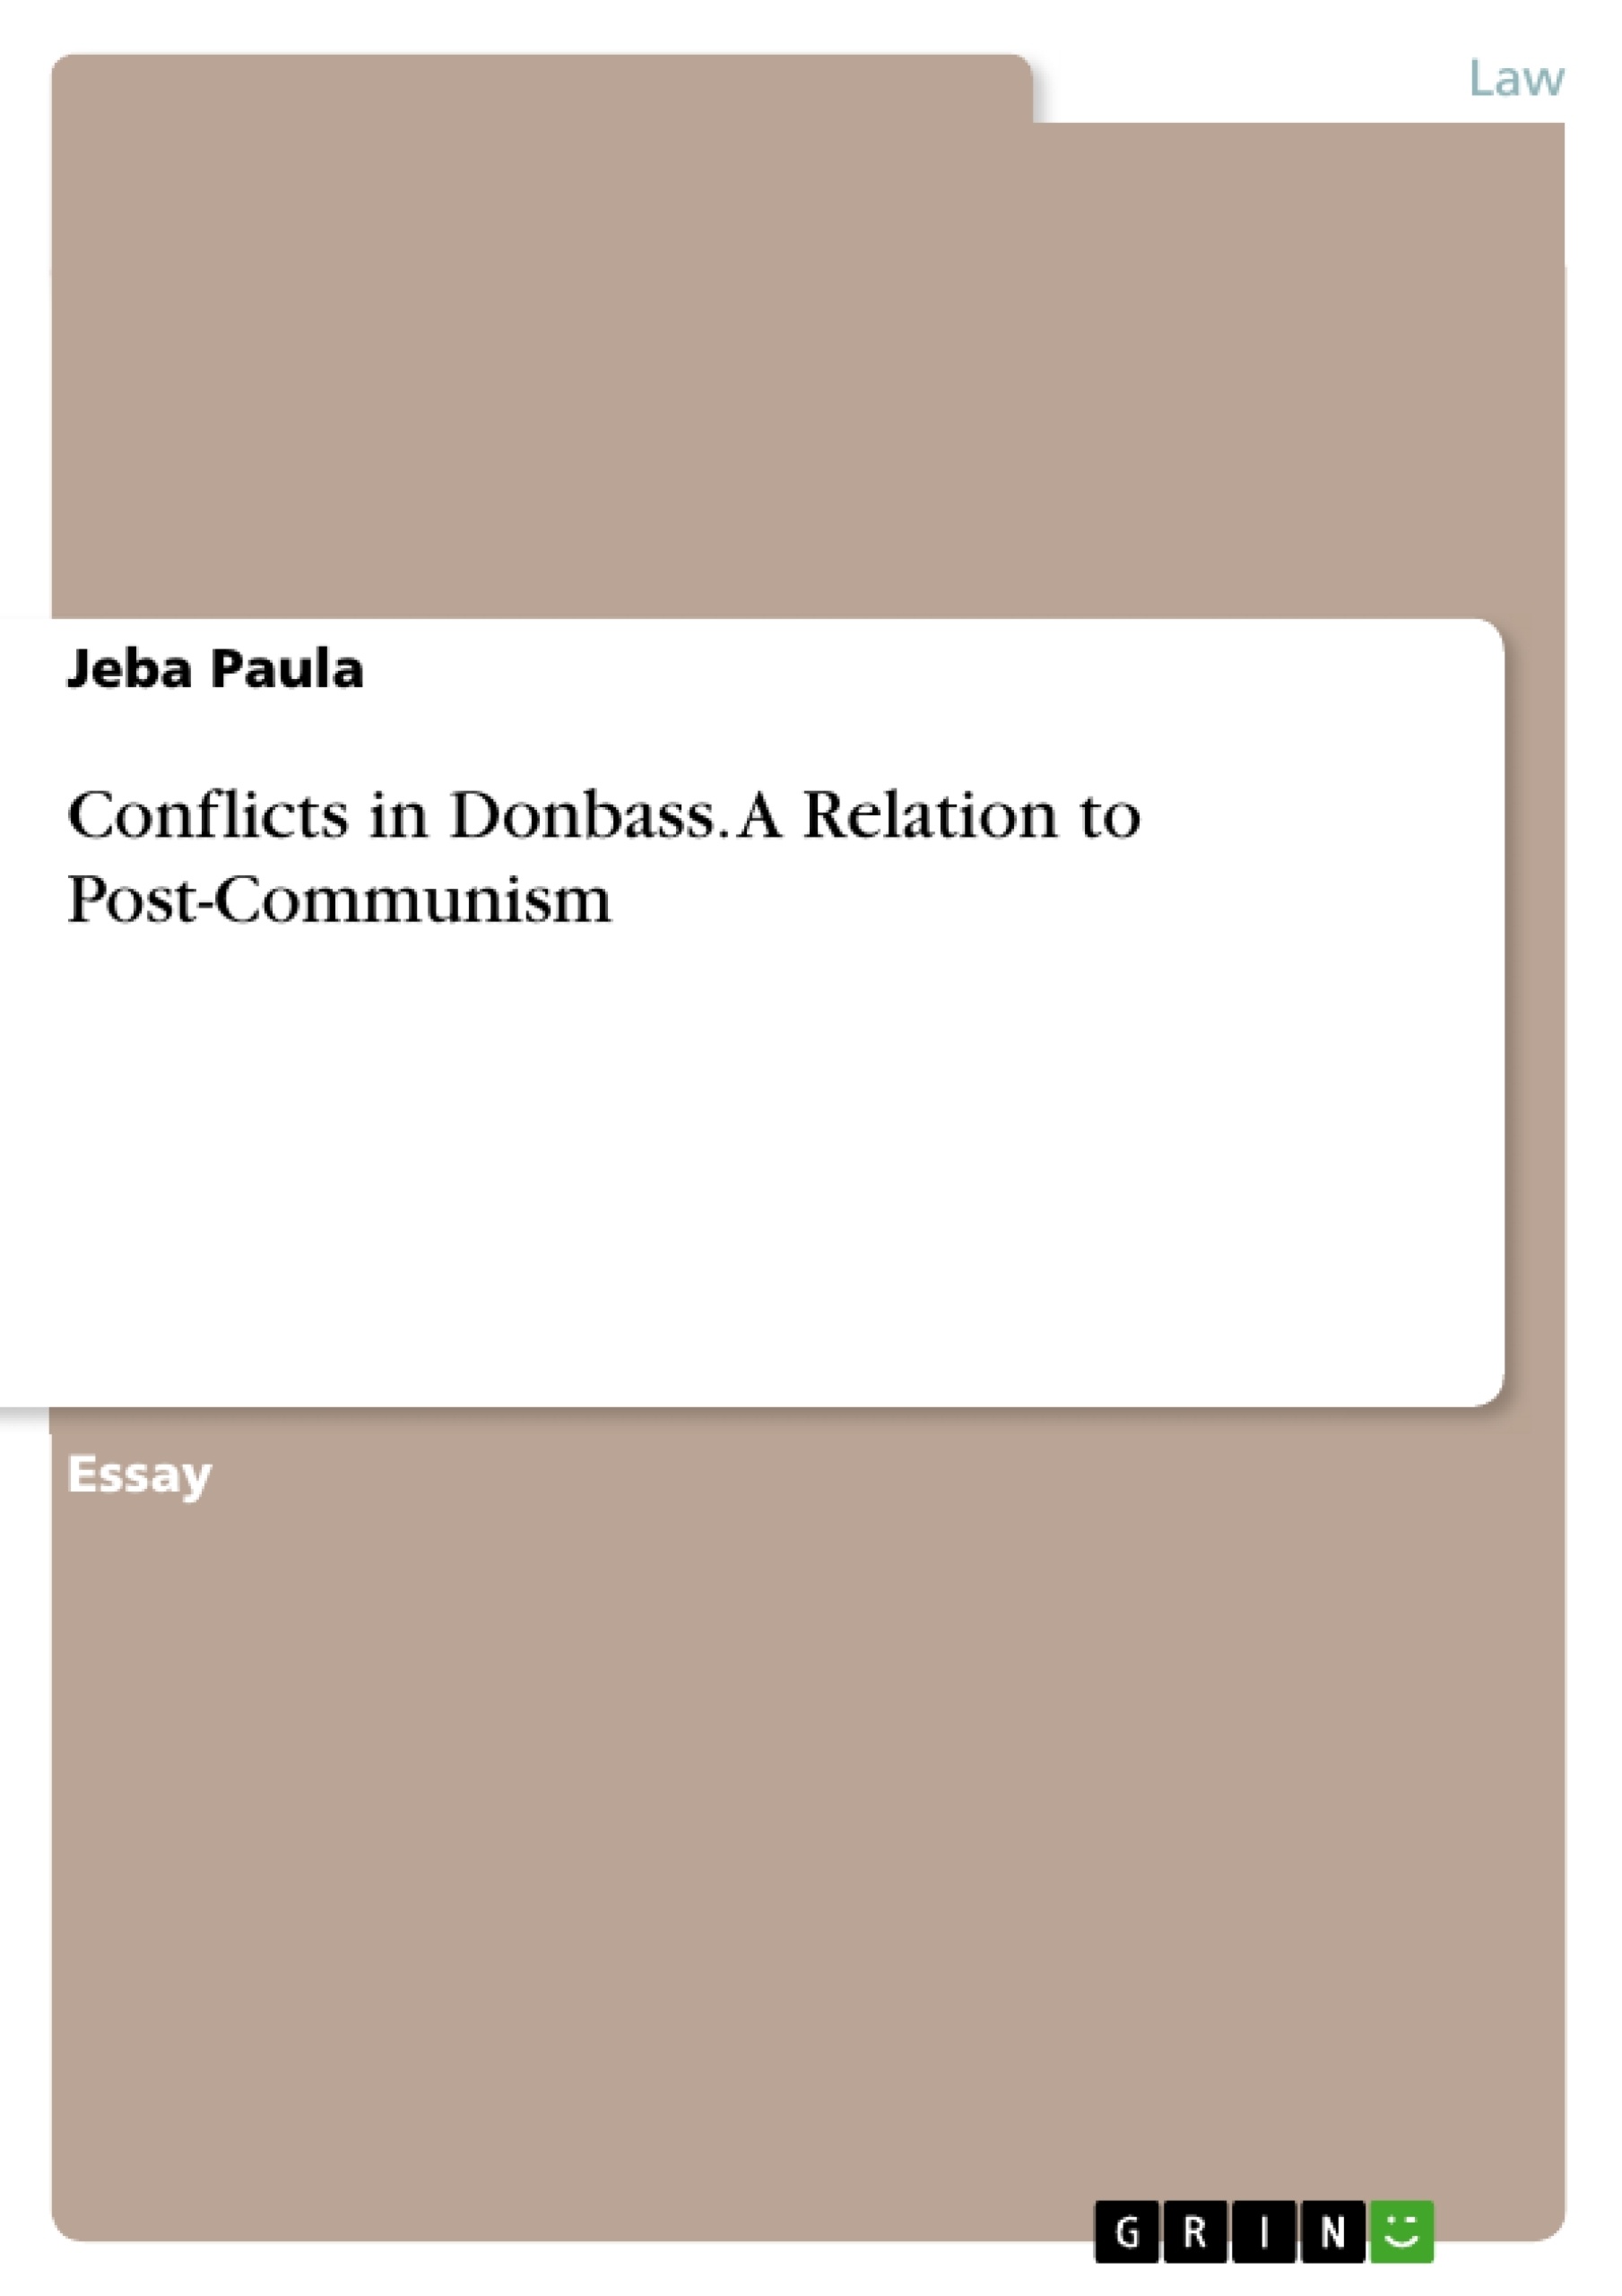 Título: Conflicts in Donbass. A Relation to Post-Communism